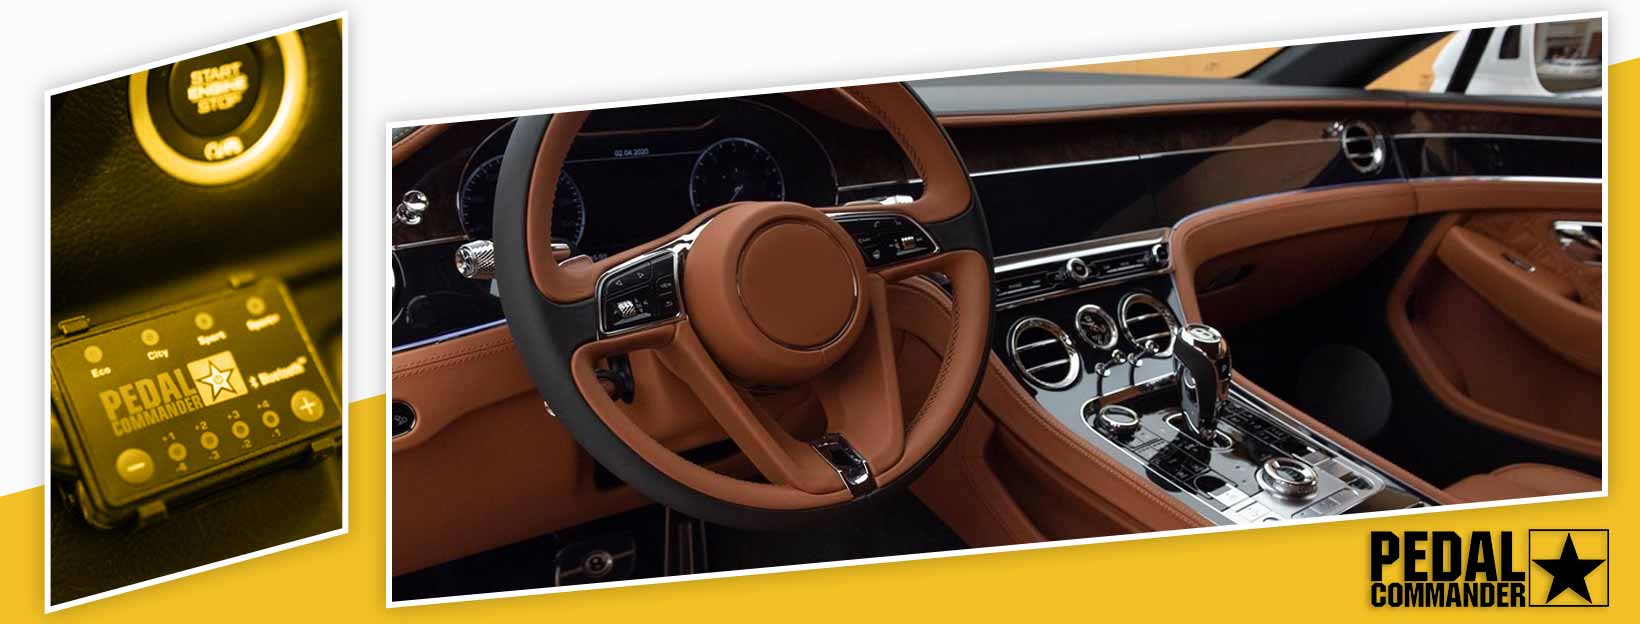 Pedal Commander for Bentley Continental GT - interior